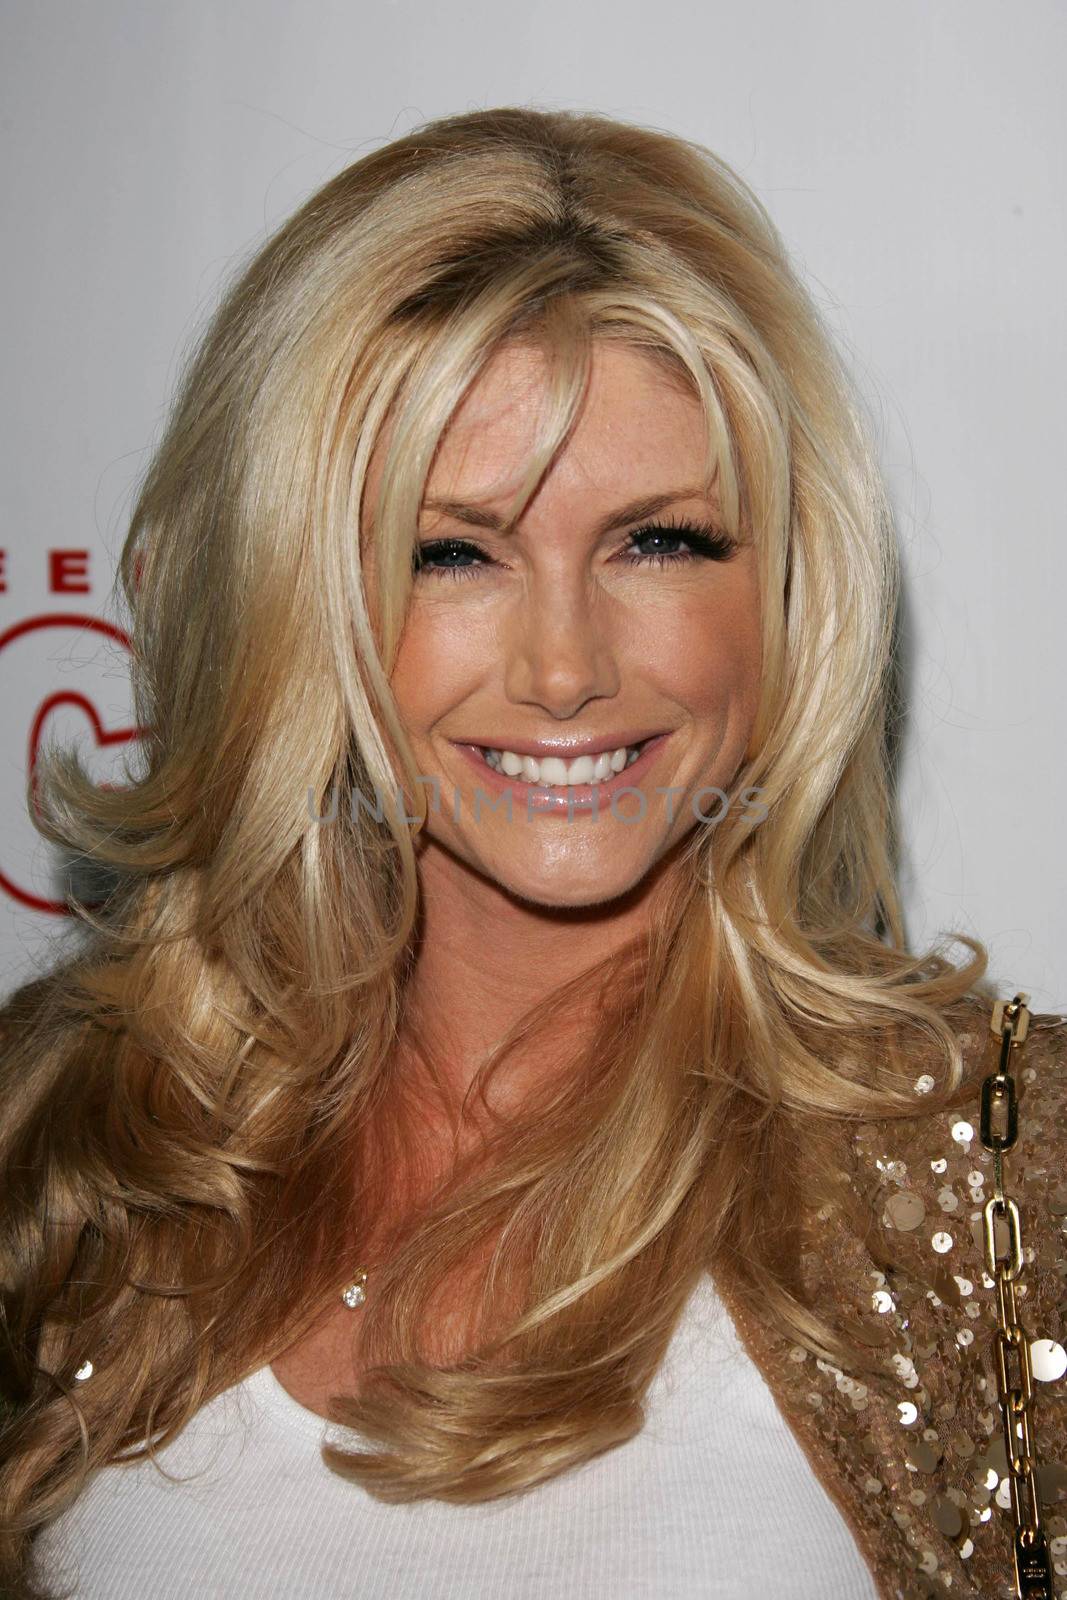 Brande Roderick at the In Touch Presents Pets And Their Stars Party, Cabana Club, Hollywood, CA 09-21-05